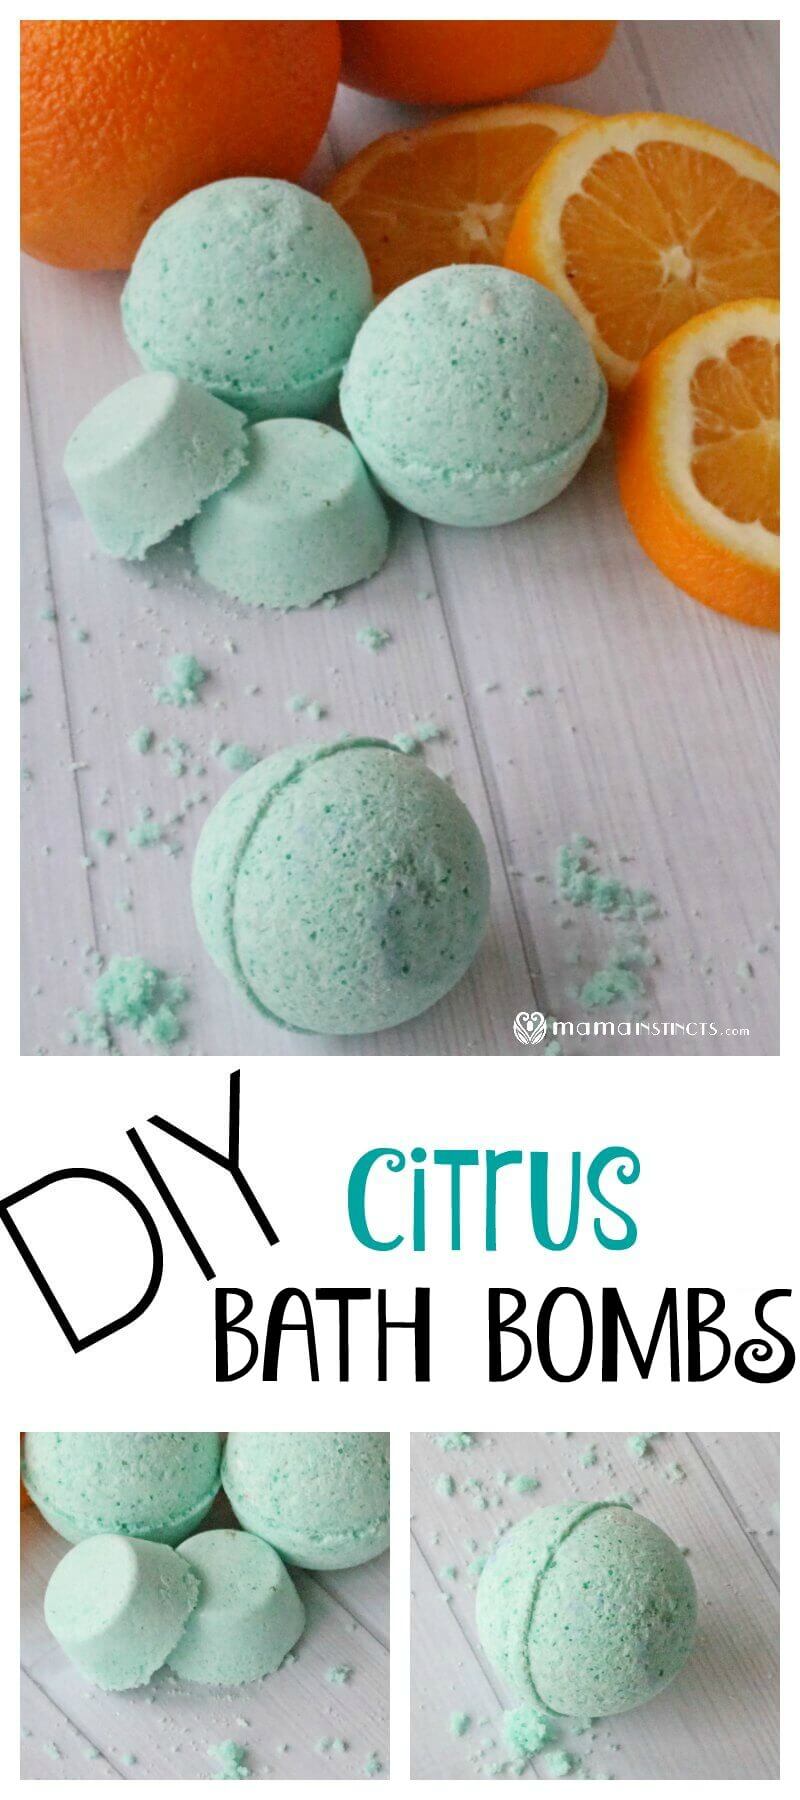 Make these DIY citrus bath bombs for a relaxing bath that will soothe your entire body. Made with mostly organic ingredients and free of artificial dyes. #DIY #bathboms